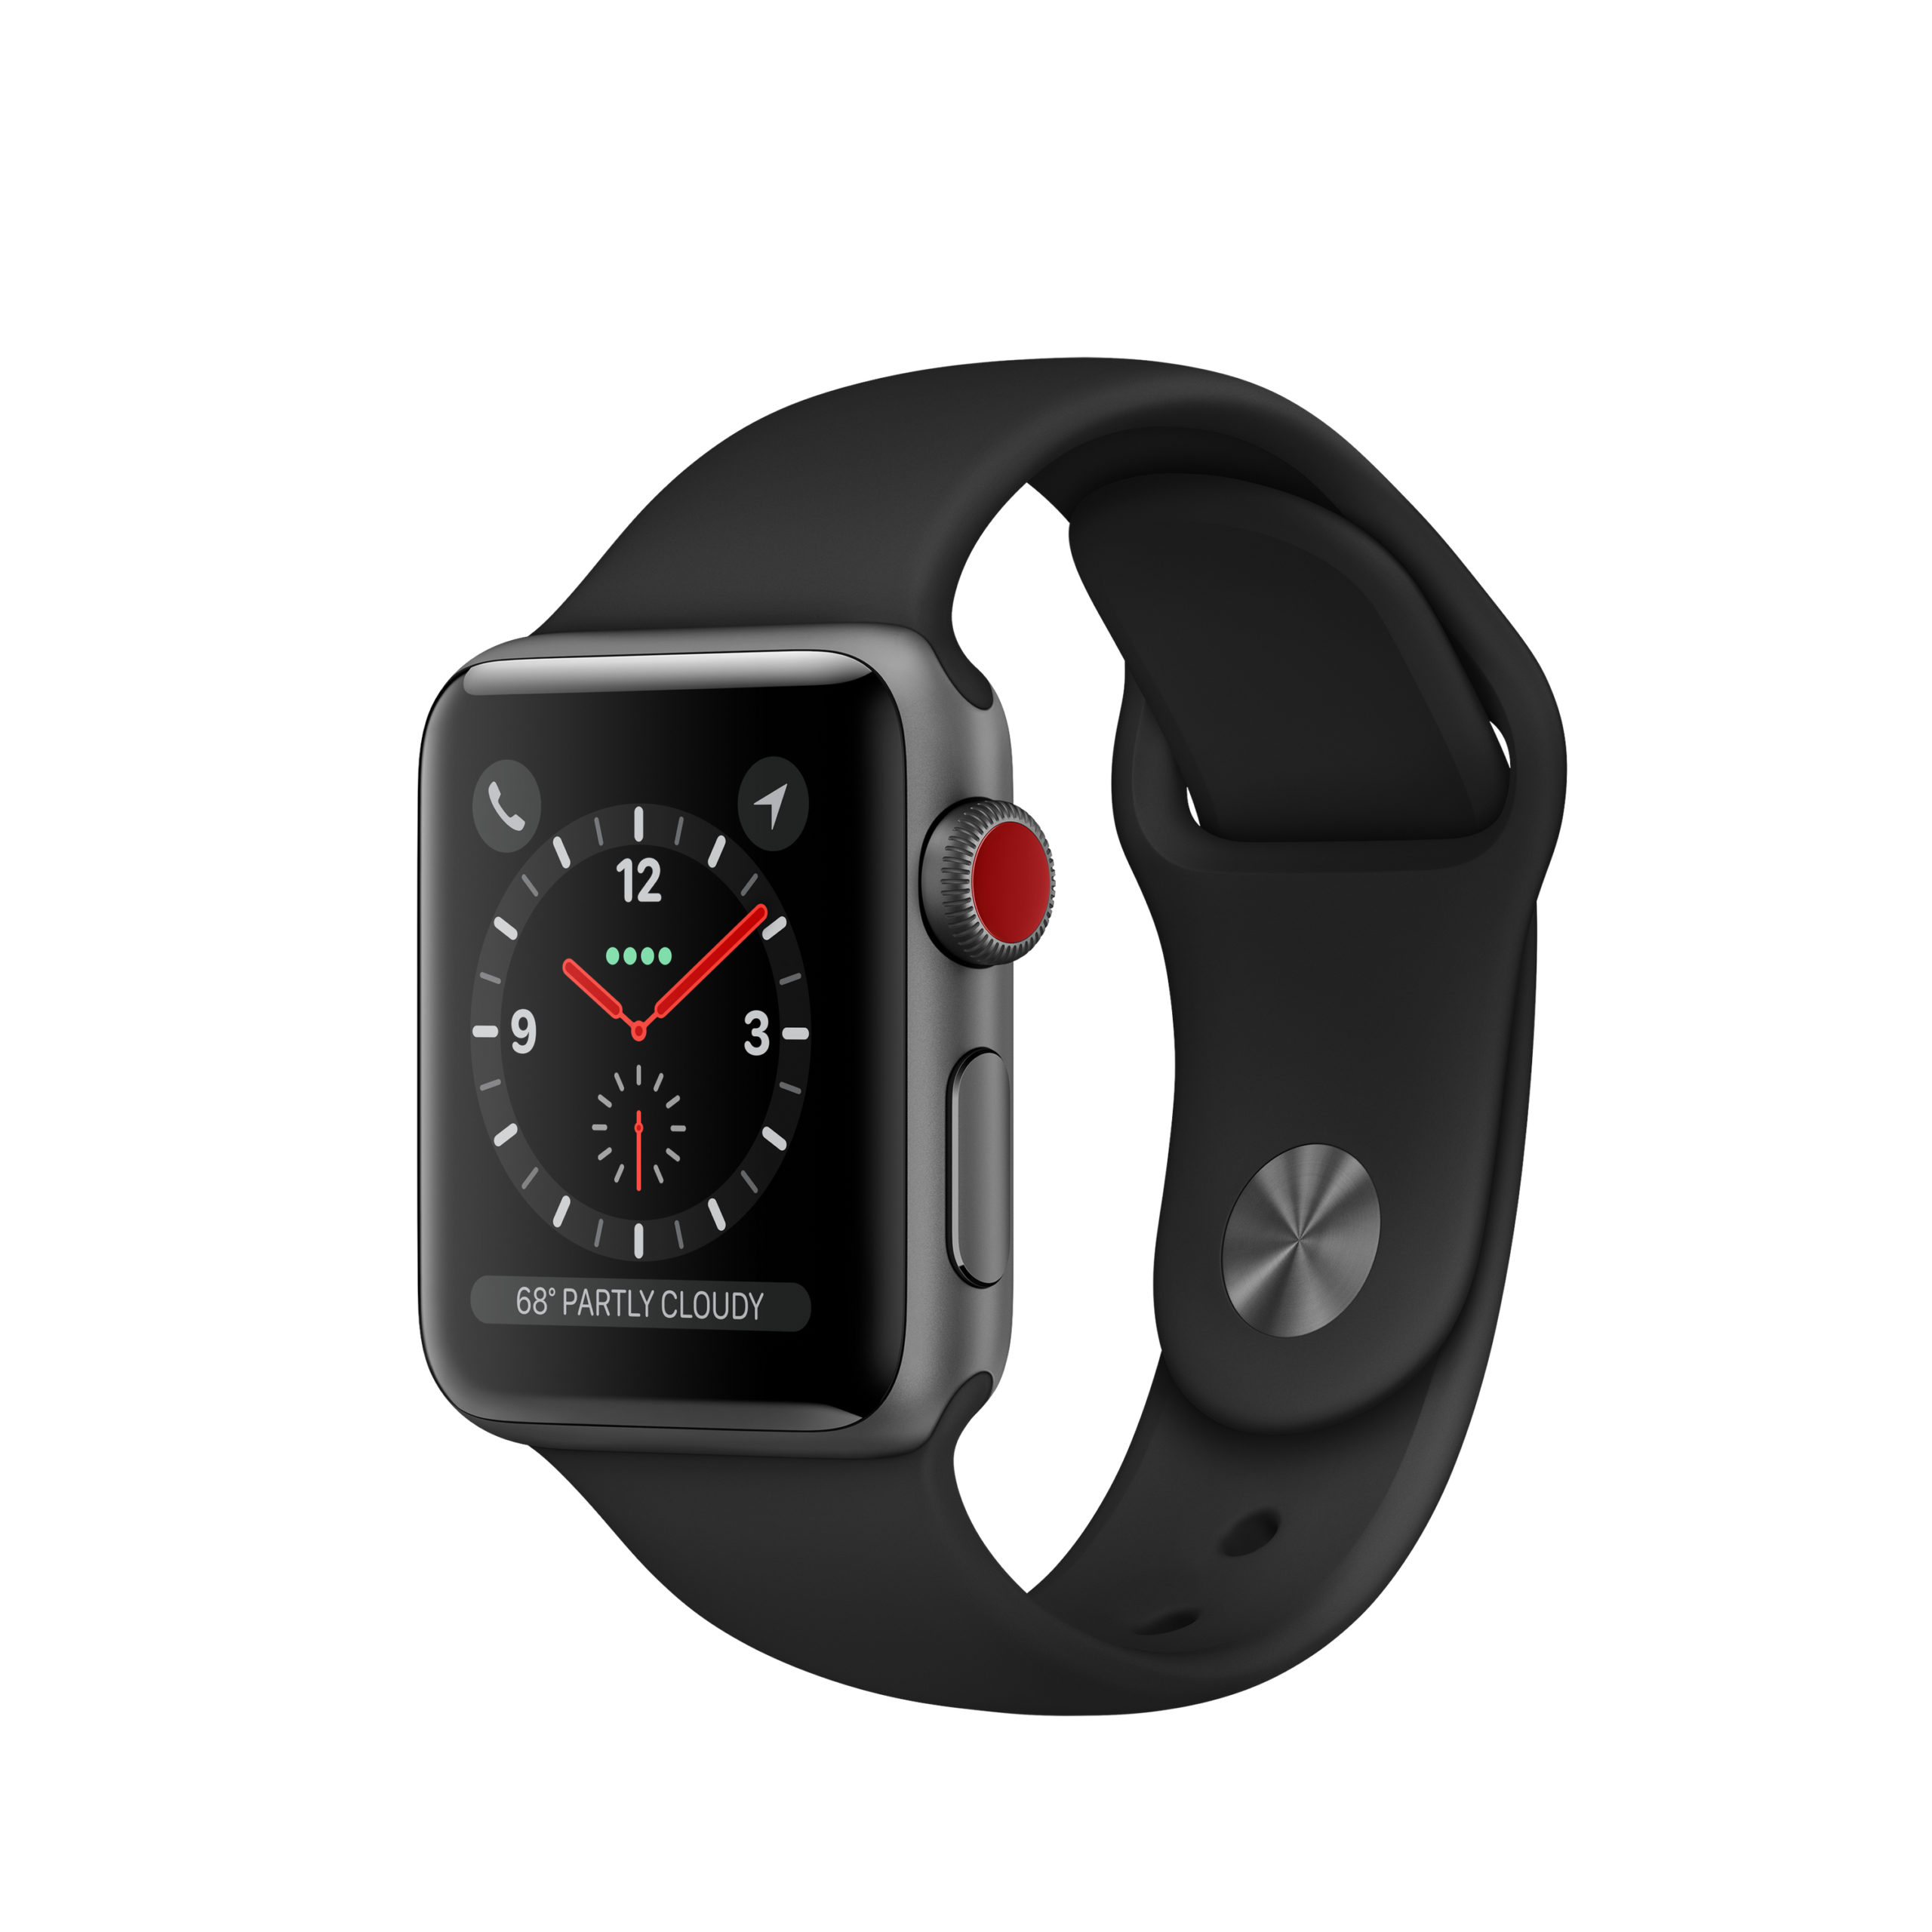 Apple Watch Series 3 38mm GPS + Cellular Space Gray Aluminum